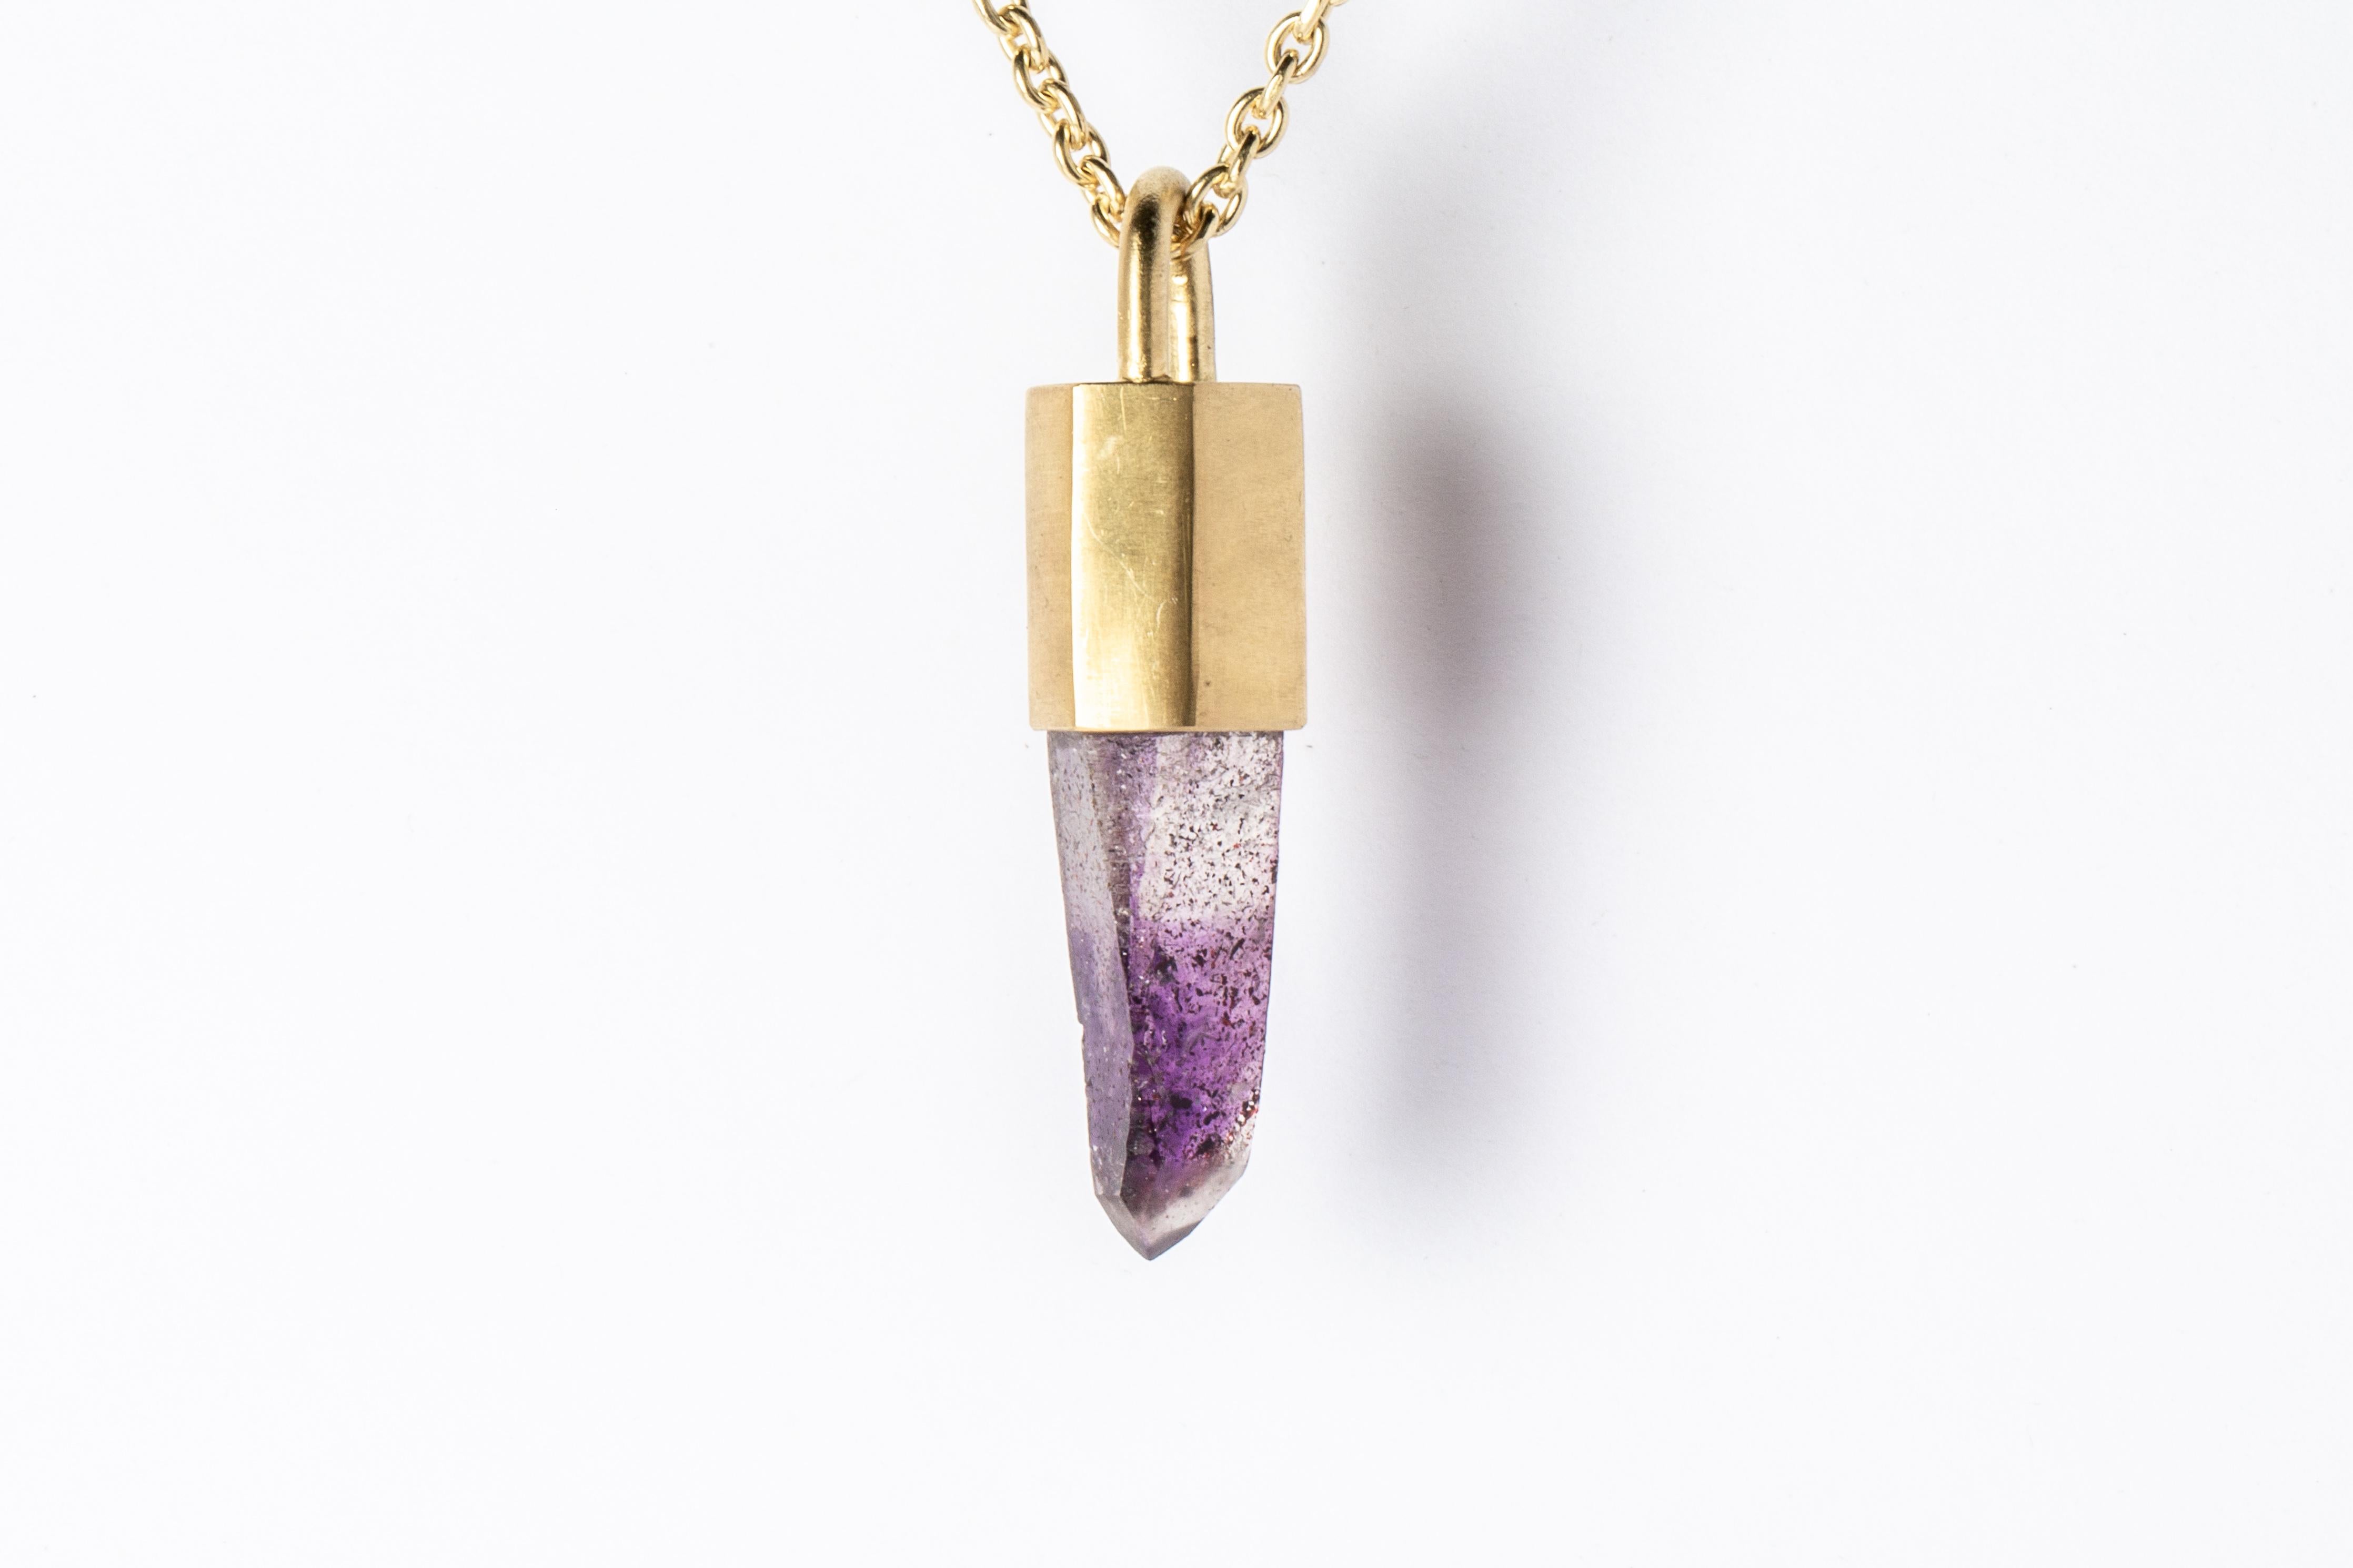 Necklace made in electroplated brass with 18k gold, electroplated sterling silver with 18k gold, and a rough of brandberg quartz. The Talisman series is an exploration into the power of natural crystals. Each product with the status of Specimen has